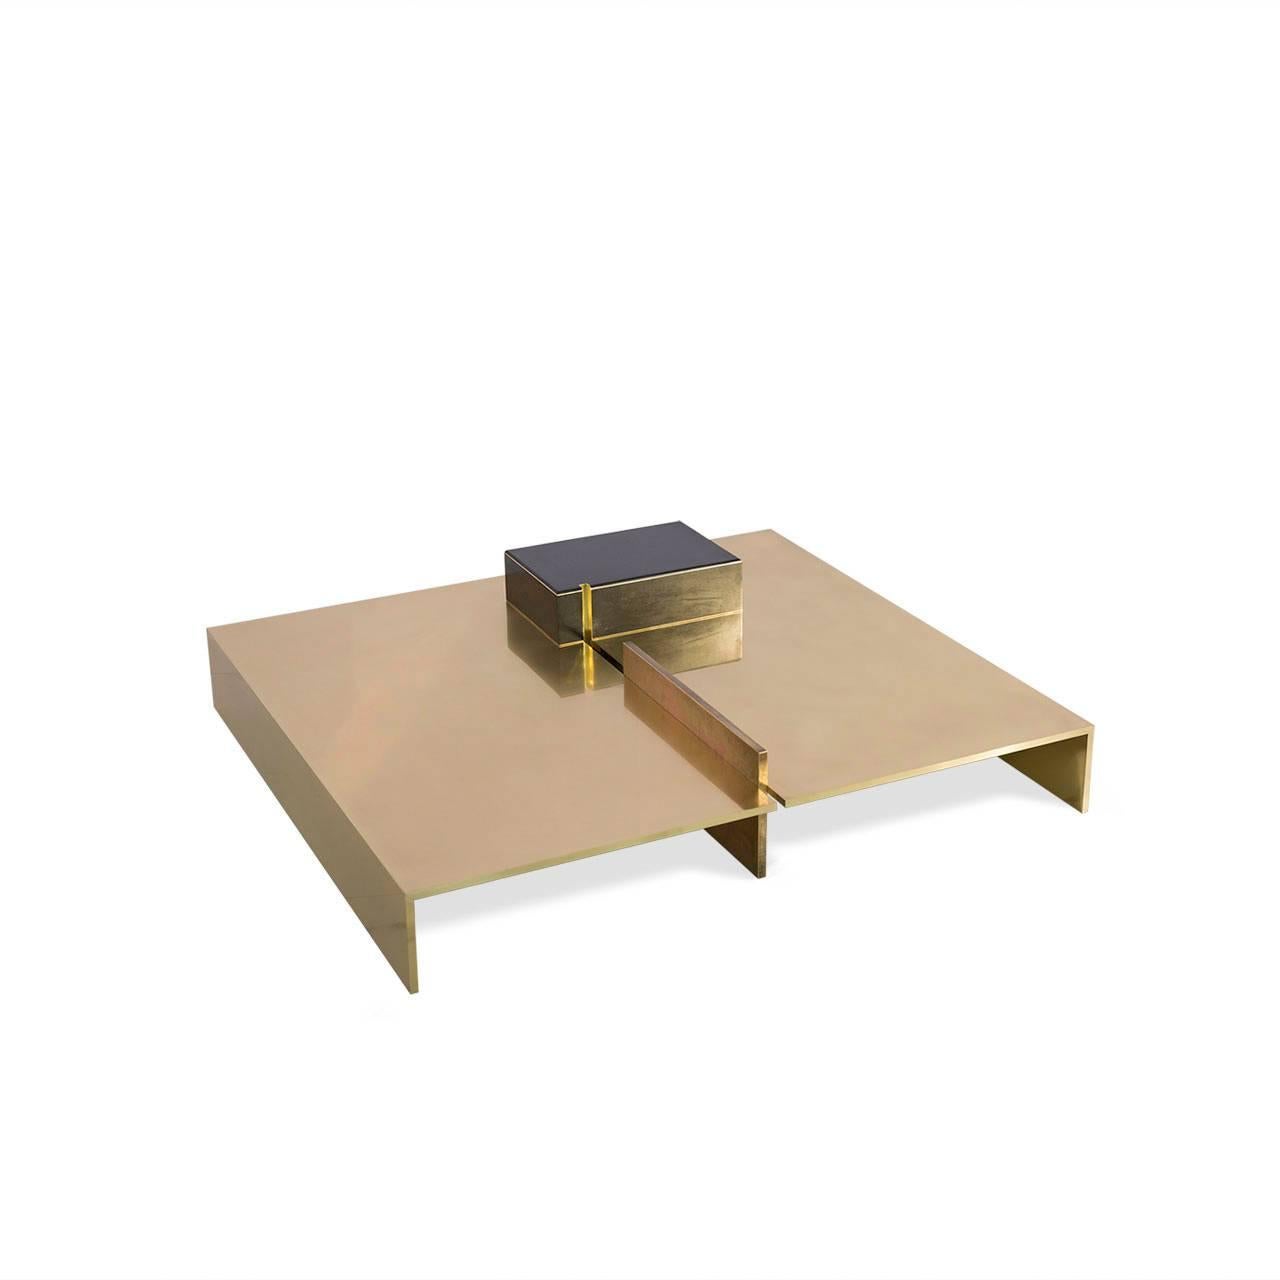 MMXVI series low sitting patinated brass center table. A slight Japanese aesthetic influence is present. The square design motif that rises above the base line of the piece has a resin coated wood inlay with embedded brass trim. Hand finished.